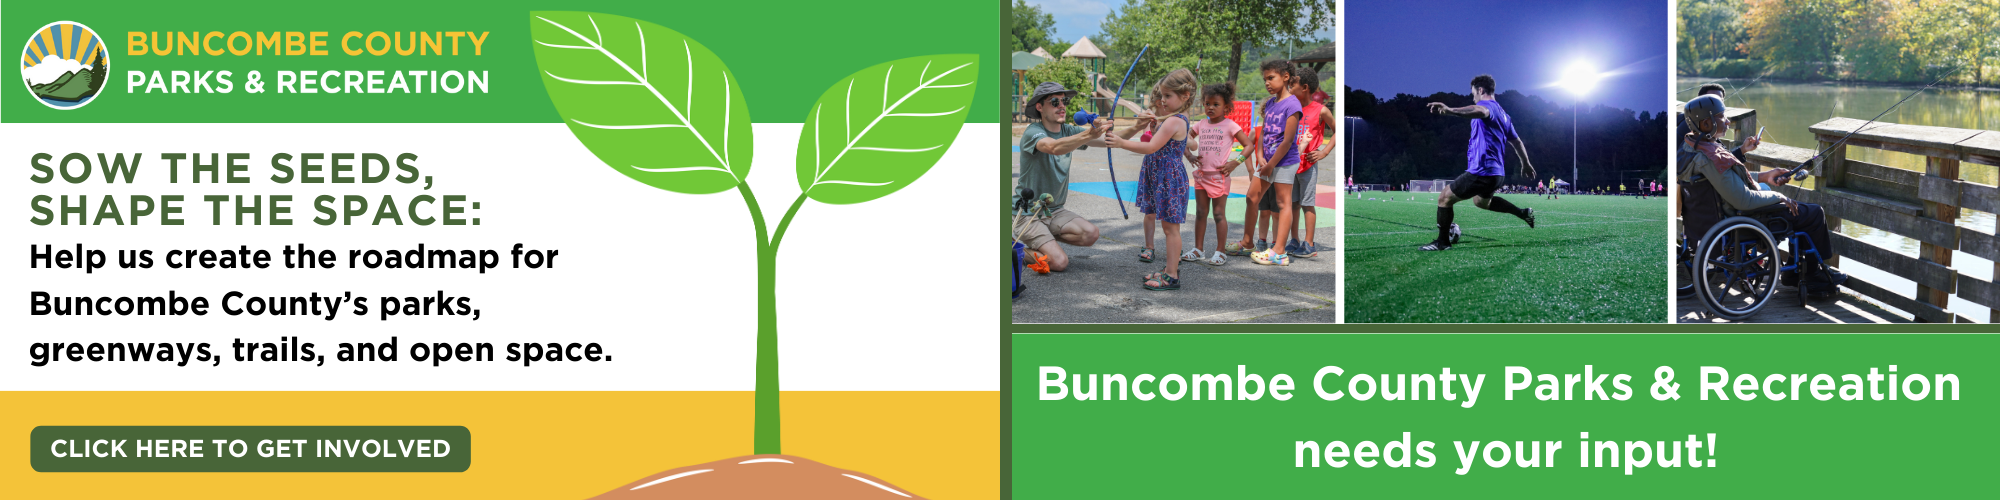 Sow the seeds, shape the space: help us create the roadmap for Buncombe County's parks, greenways, trails, and open space.